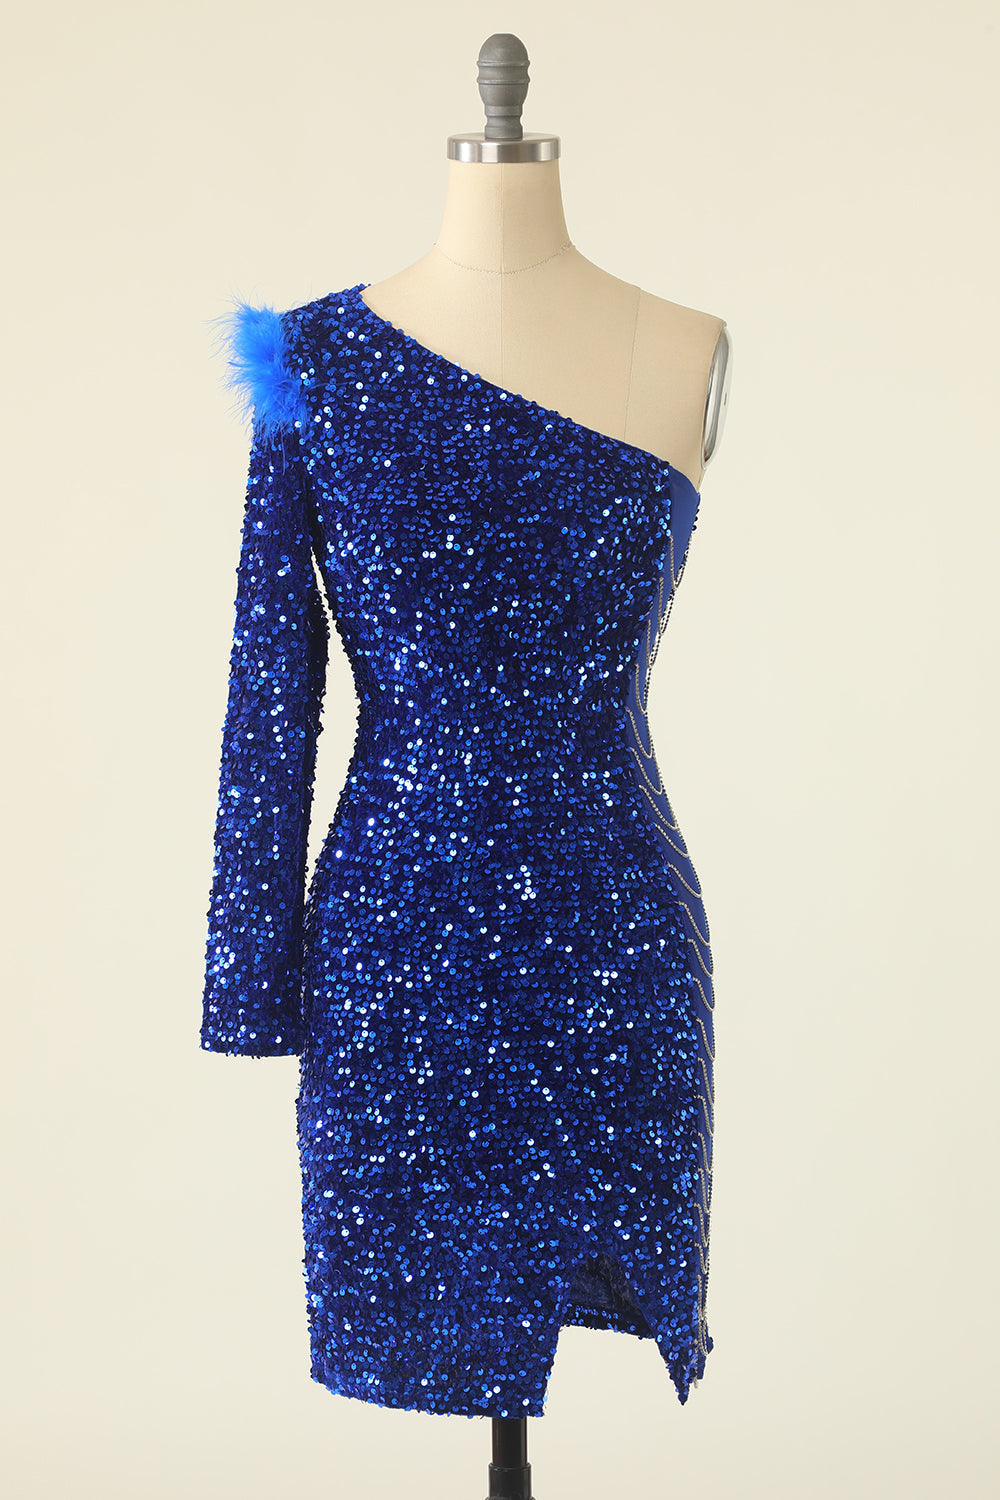 Homecoming Dress Classy Elegant, Royal Blue One Shoulder Sequined Cocktail Dress With Feathers